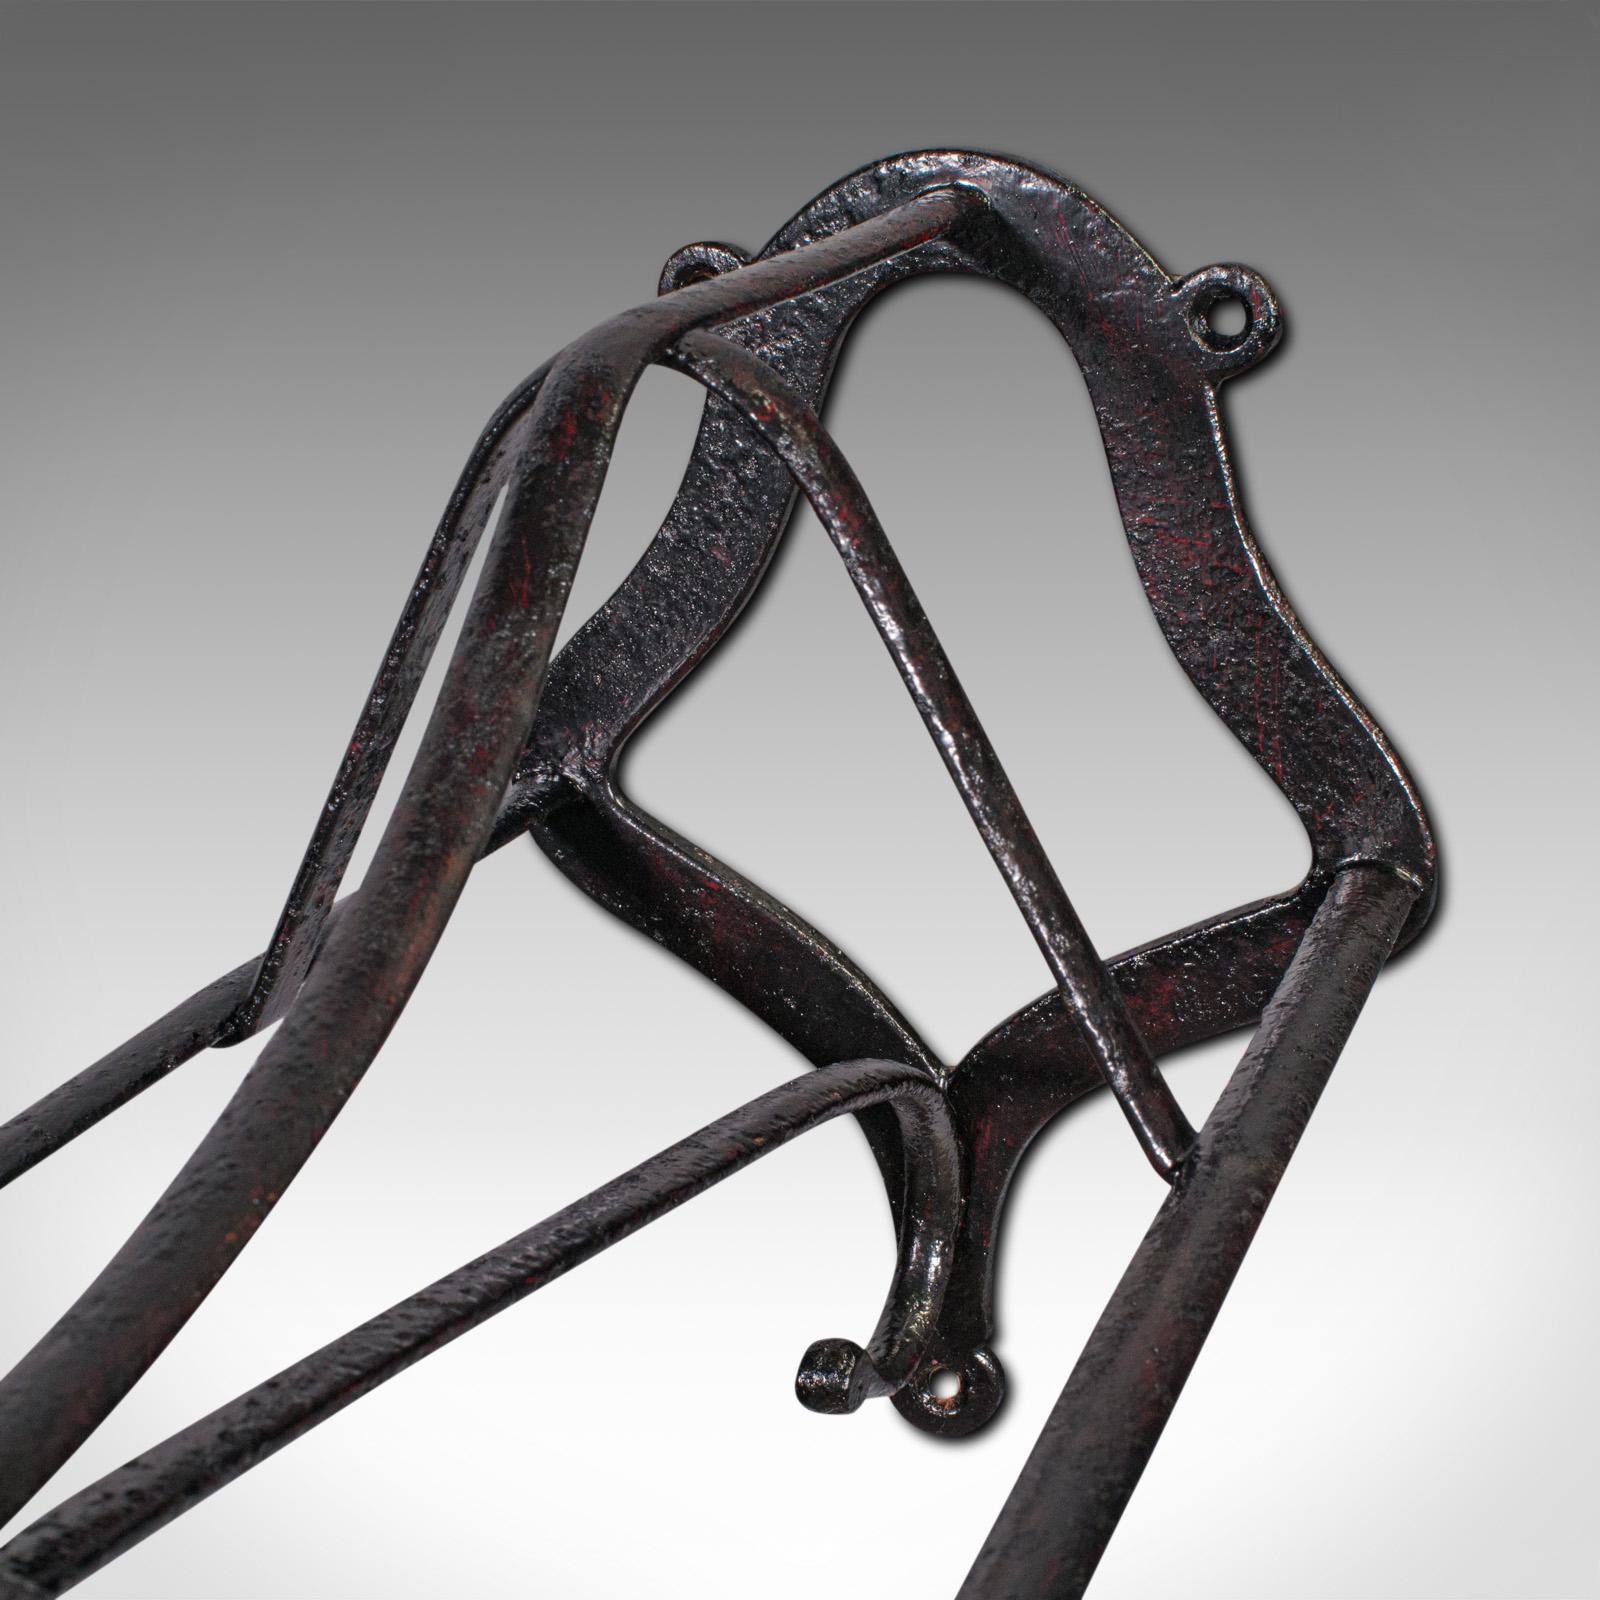 Antique Duck Bill Saddle Rack, English Cast Iron Equestrian Tack Rest, Victorian In Good Condition For Sale In Hele, Devon, GB